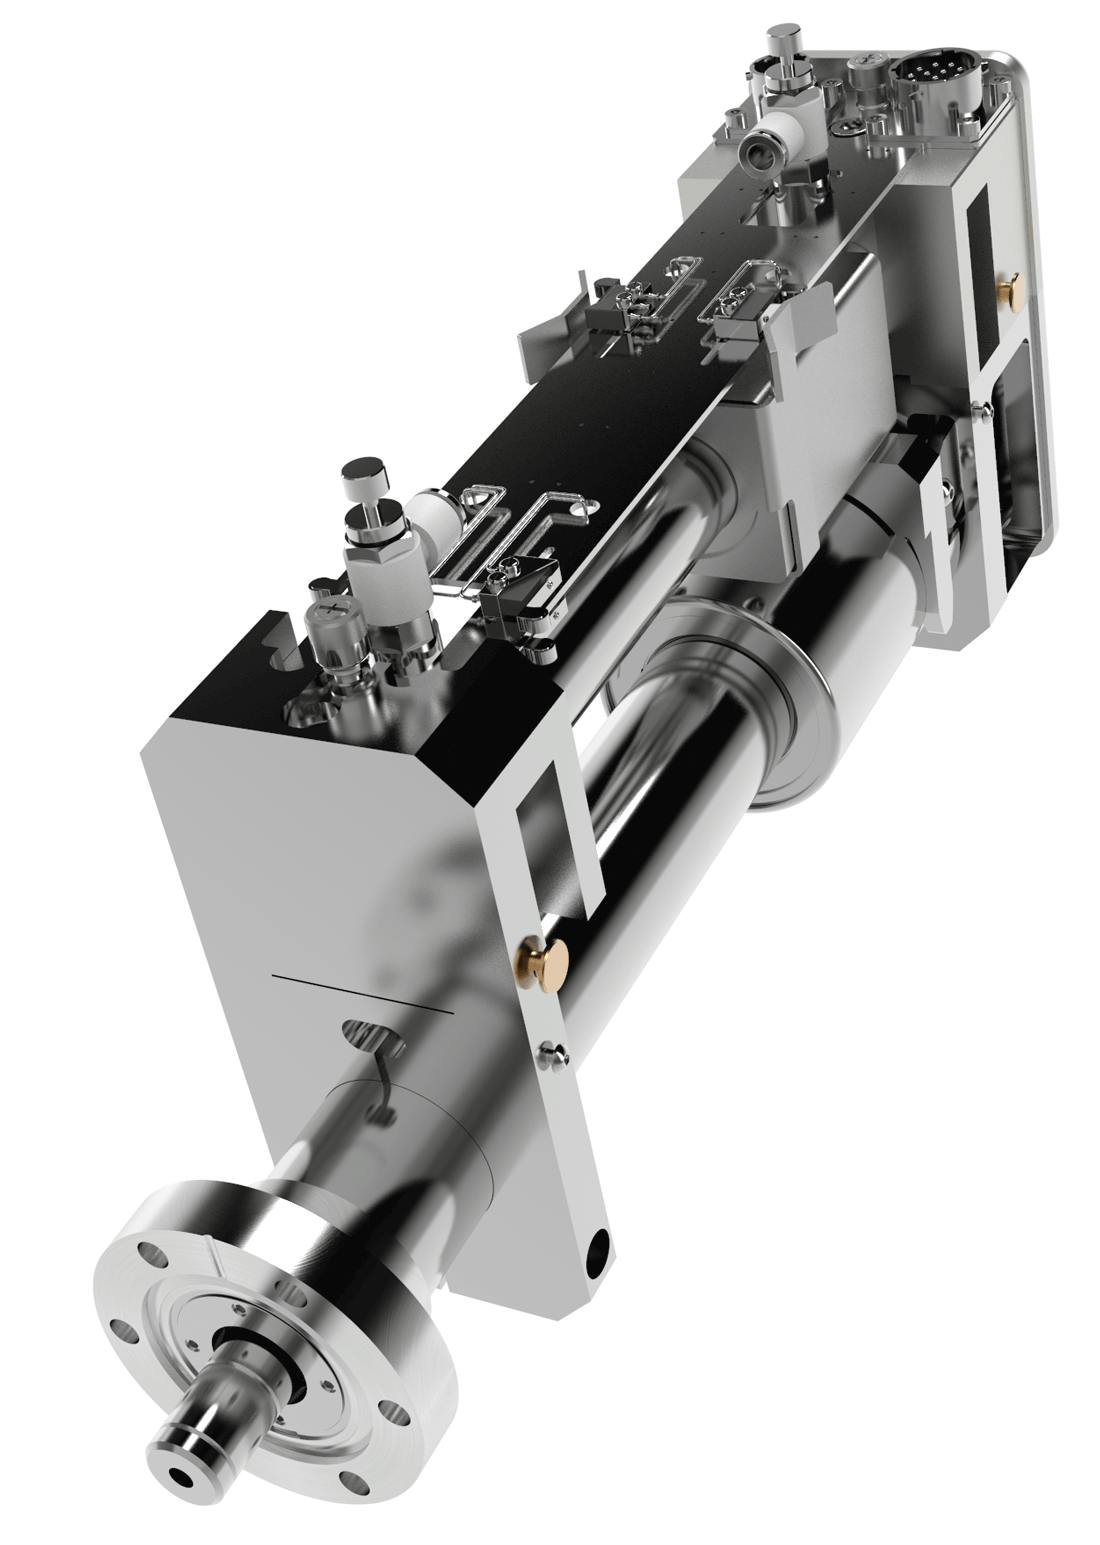 Pneumatic Magnetically-coupled Linear Actuator